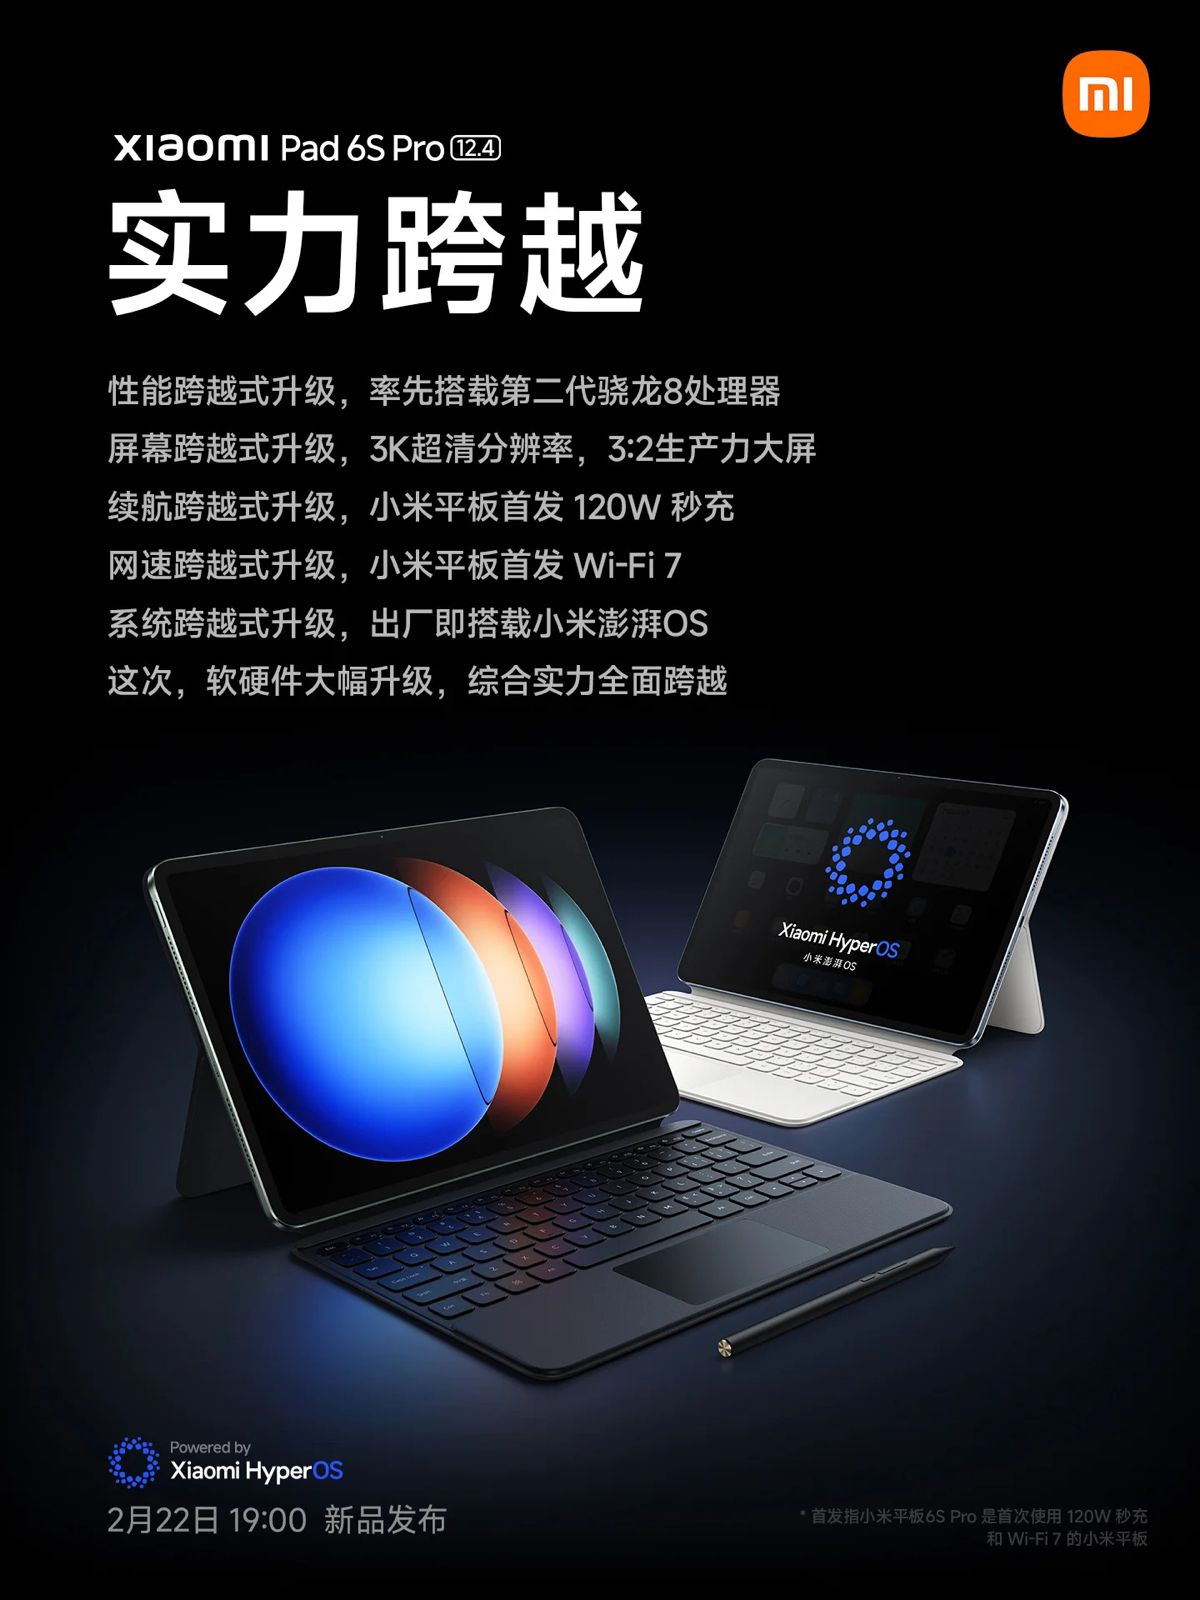 Xiaomi Pad 6S Pro 12.4 features a 3K, 144Hz display and 120W fast charging